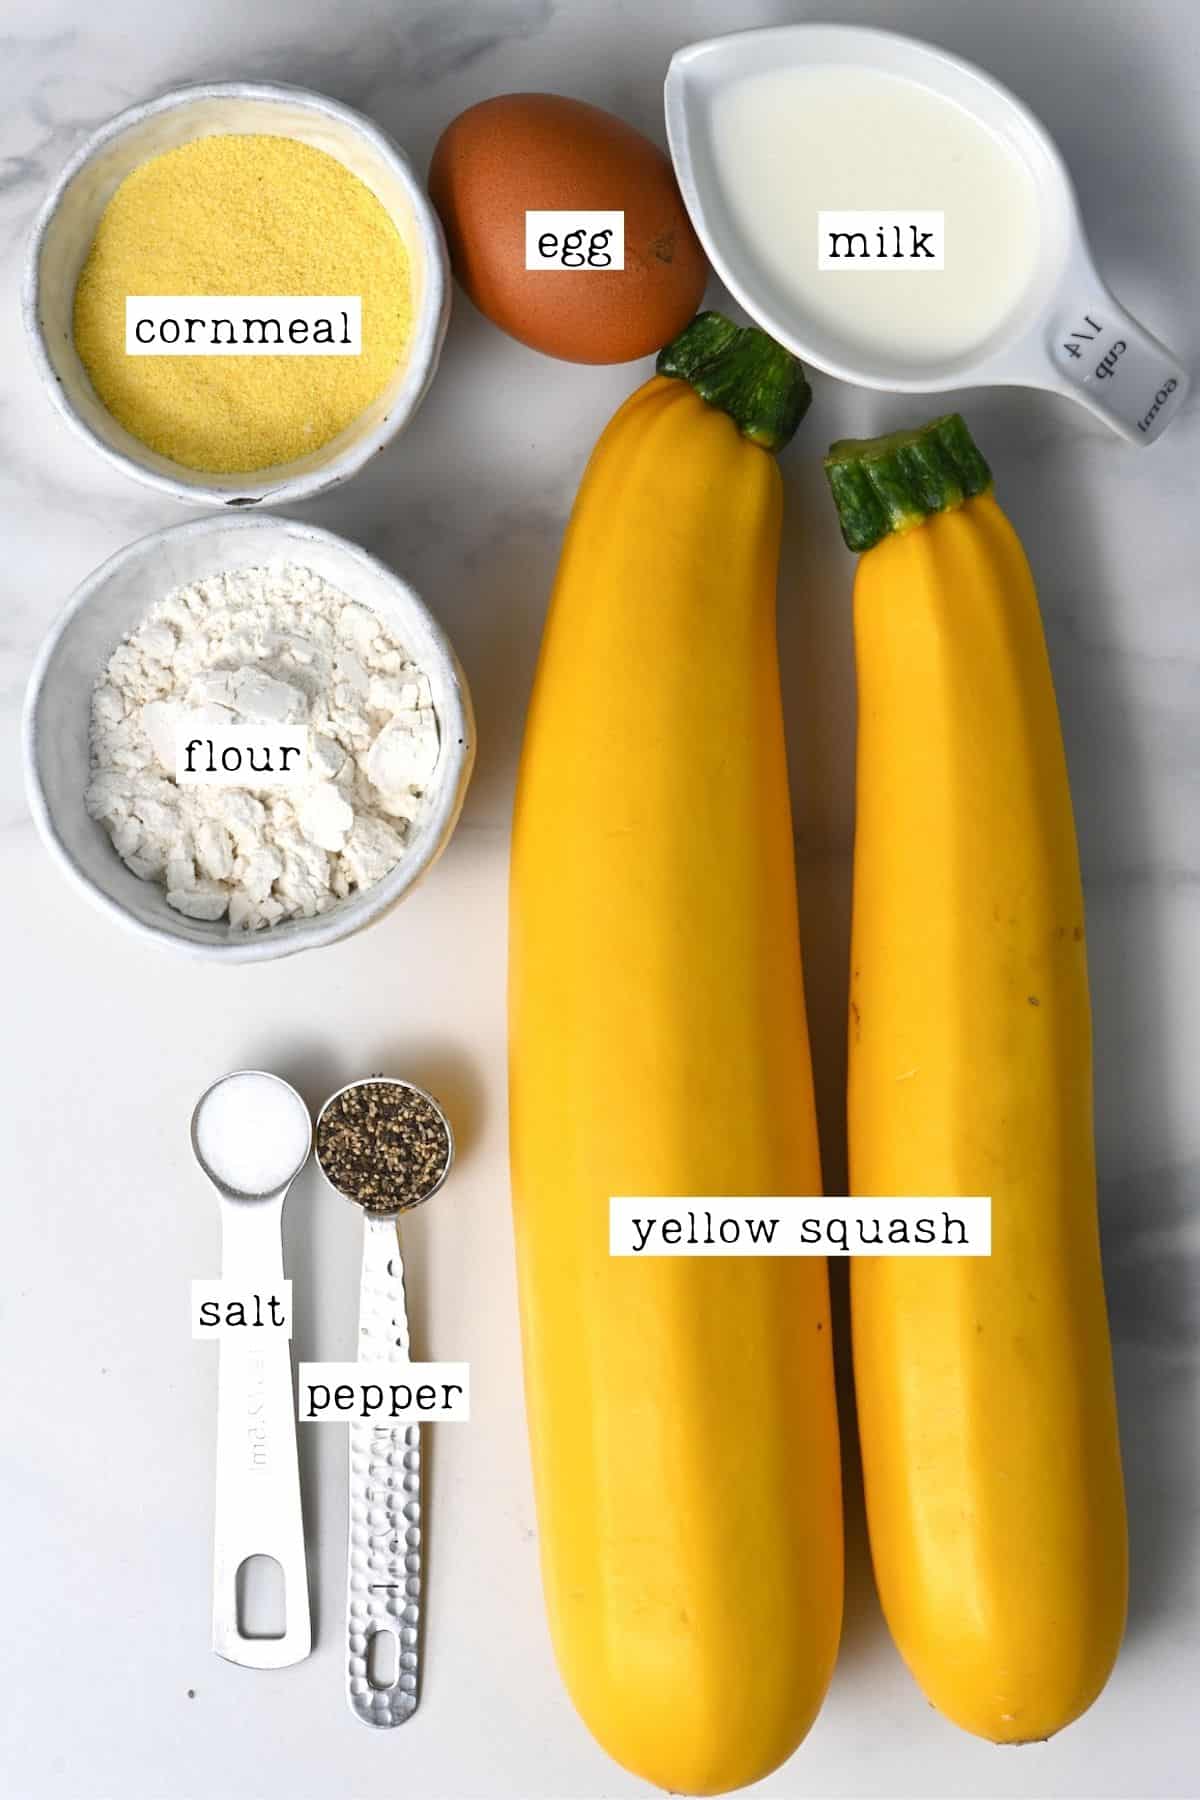 Ingredients for fried squash